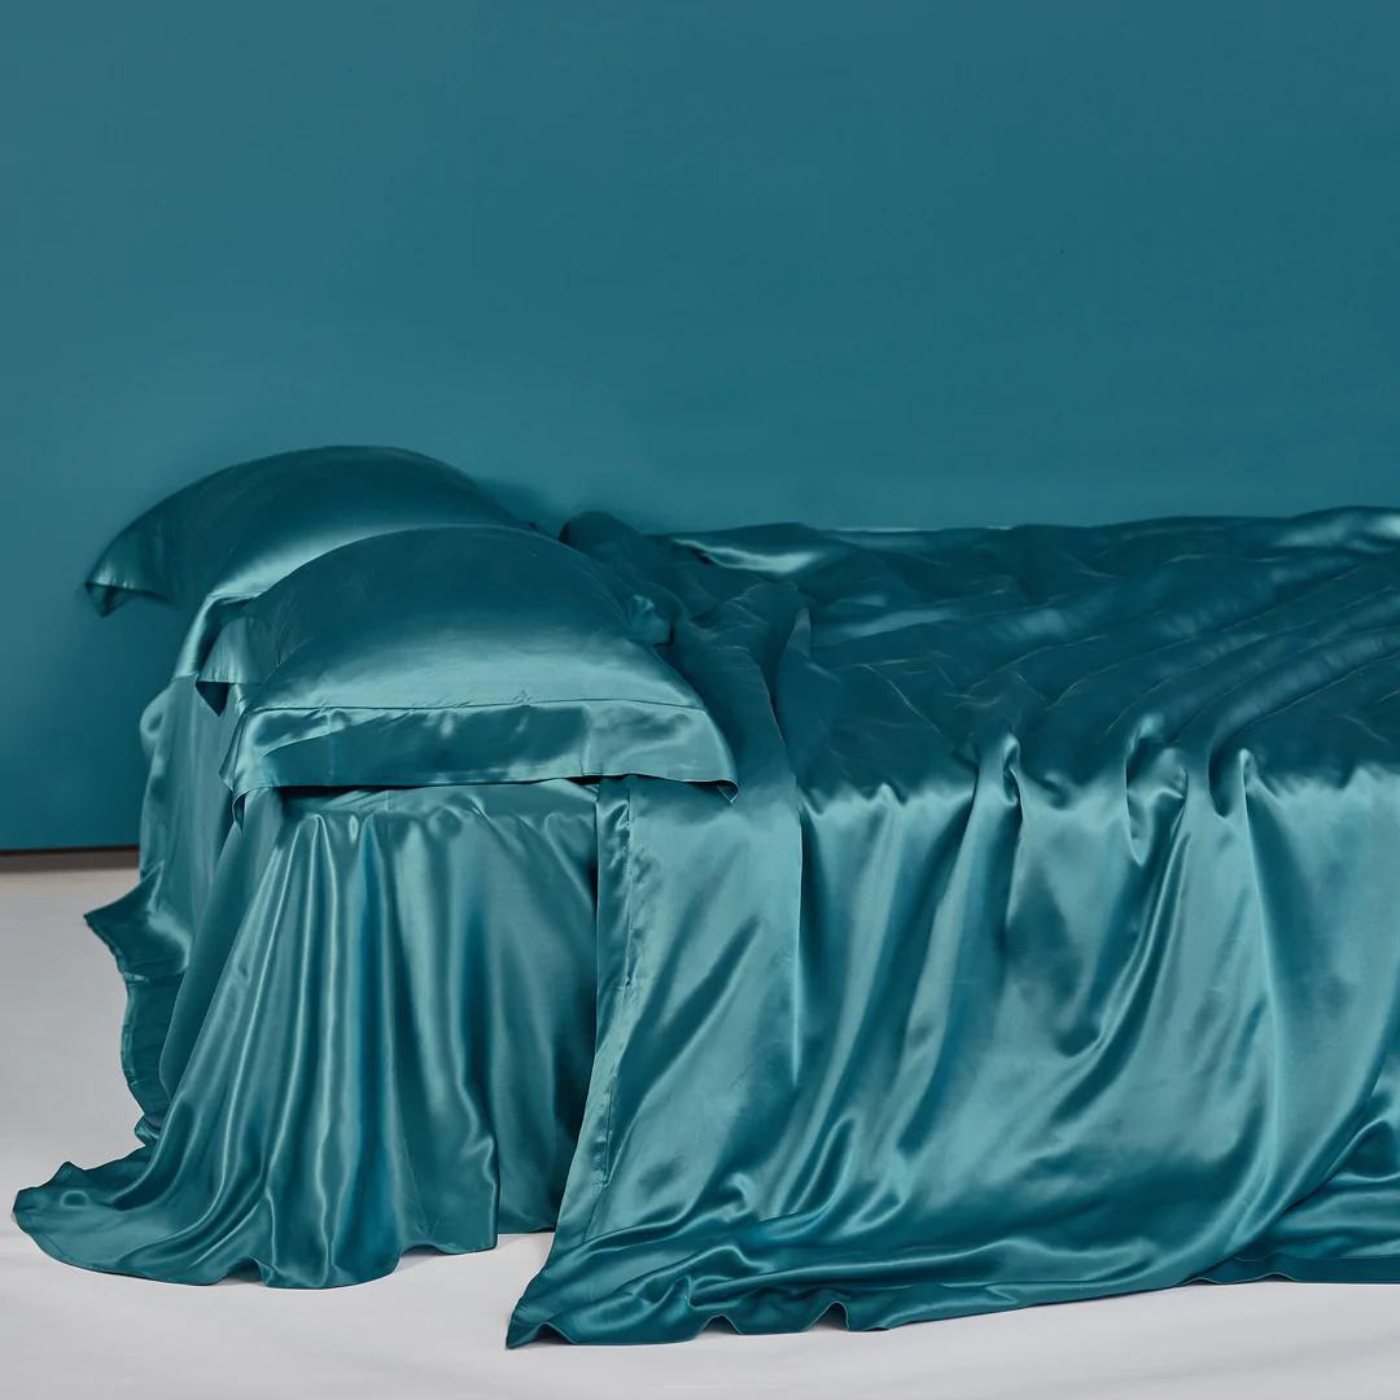 Luxury 4 Psc 22 Momme 100% Mulberry Silk Bedding Set Duvet Cover Fitted Sheet 2 Pillow Covers Cases in Teal Blue